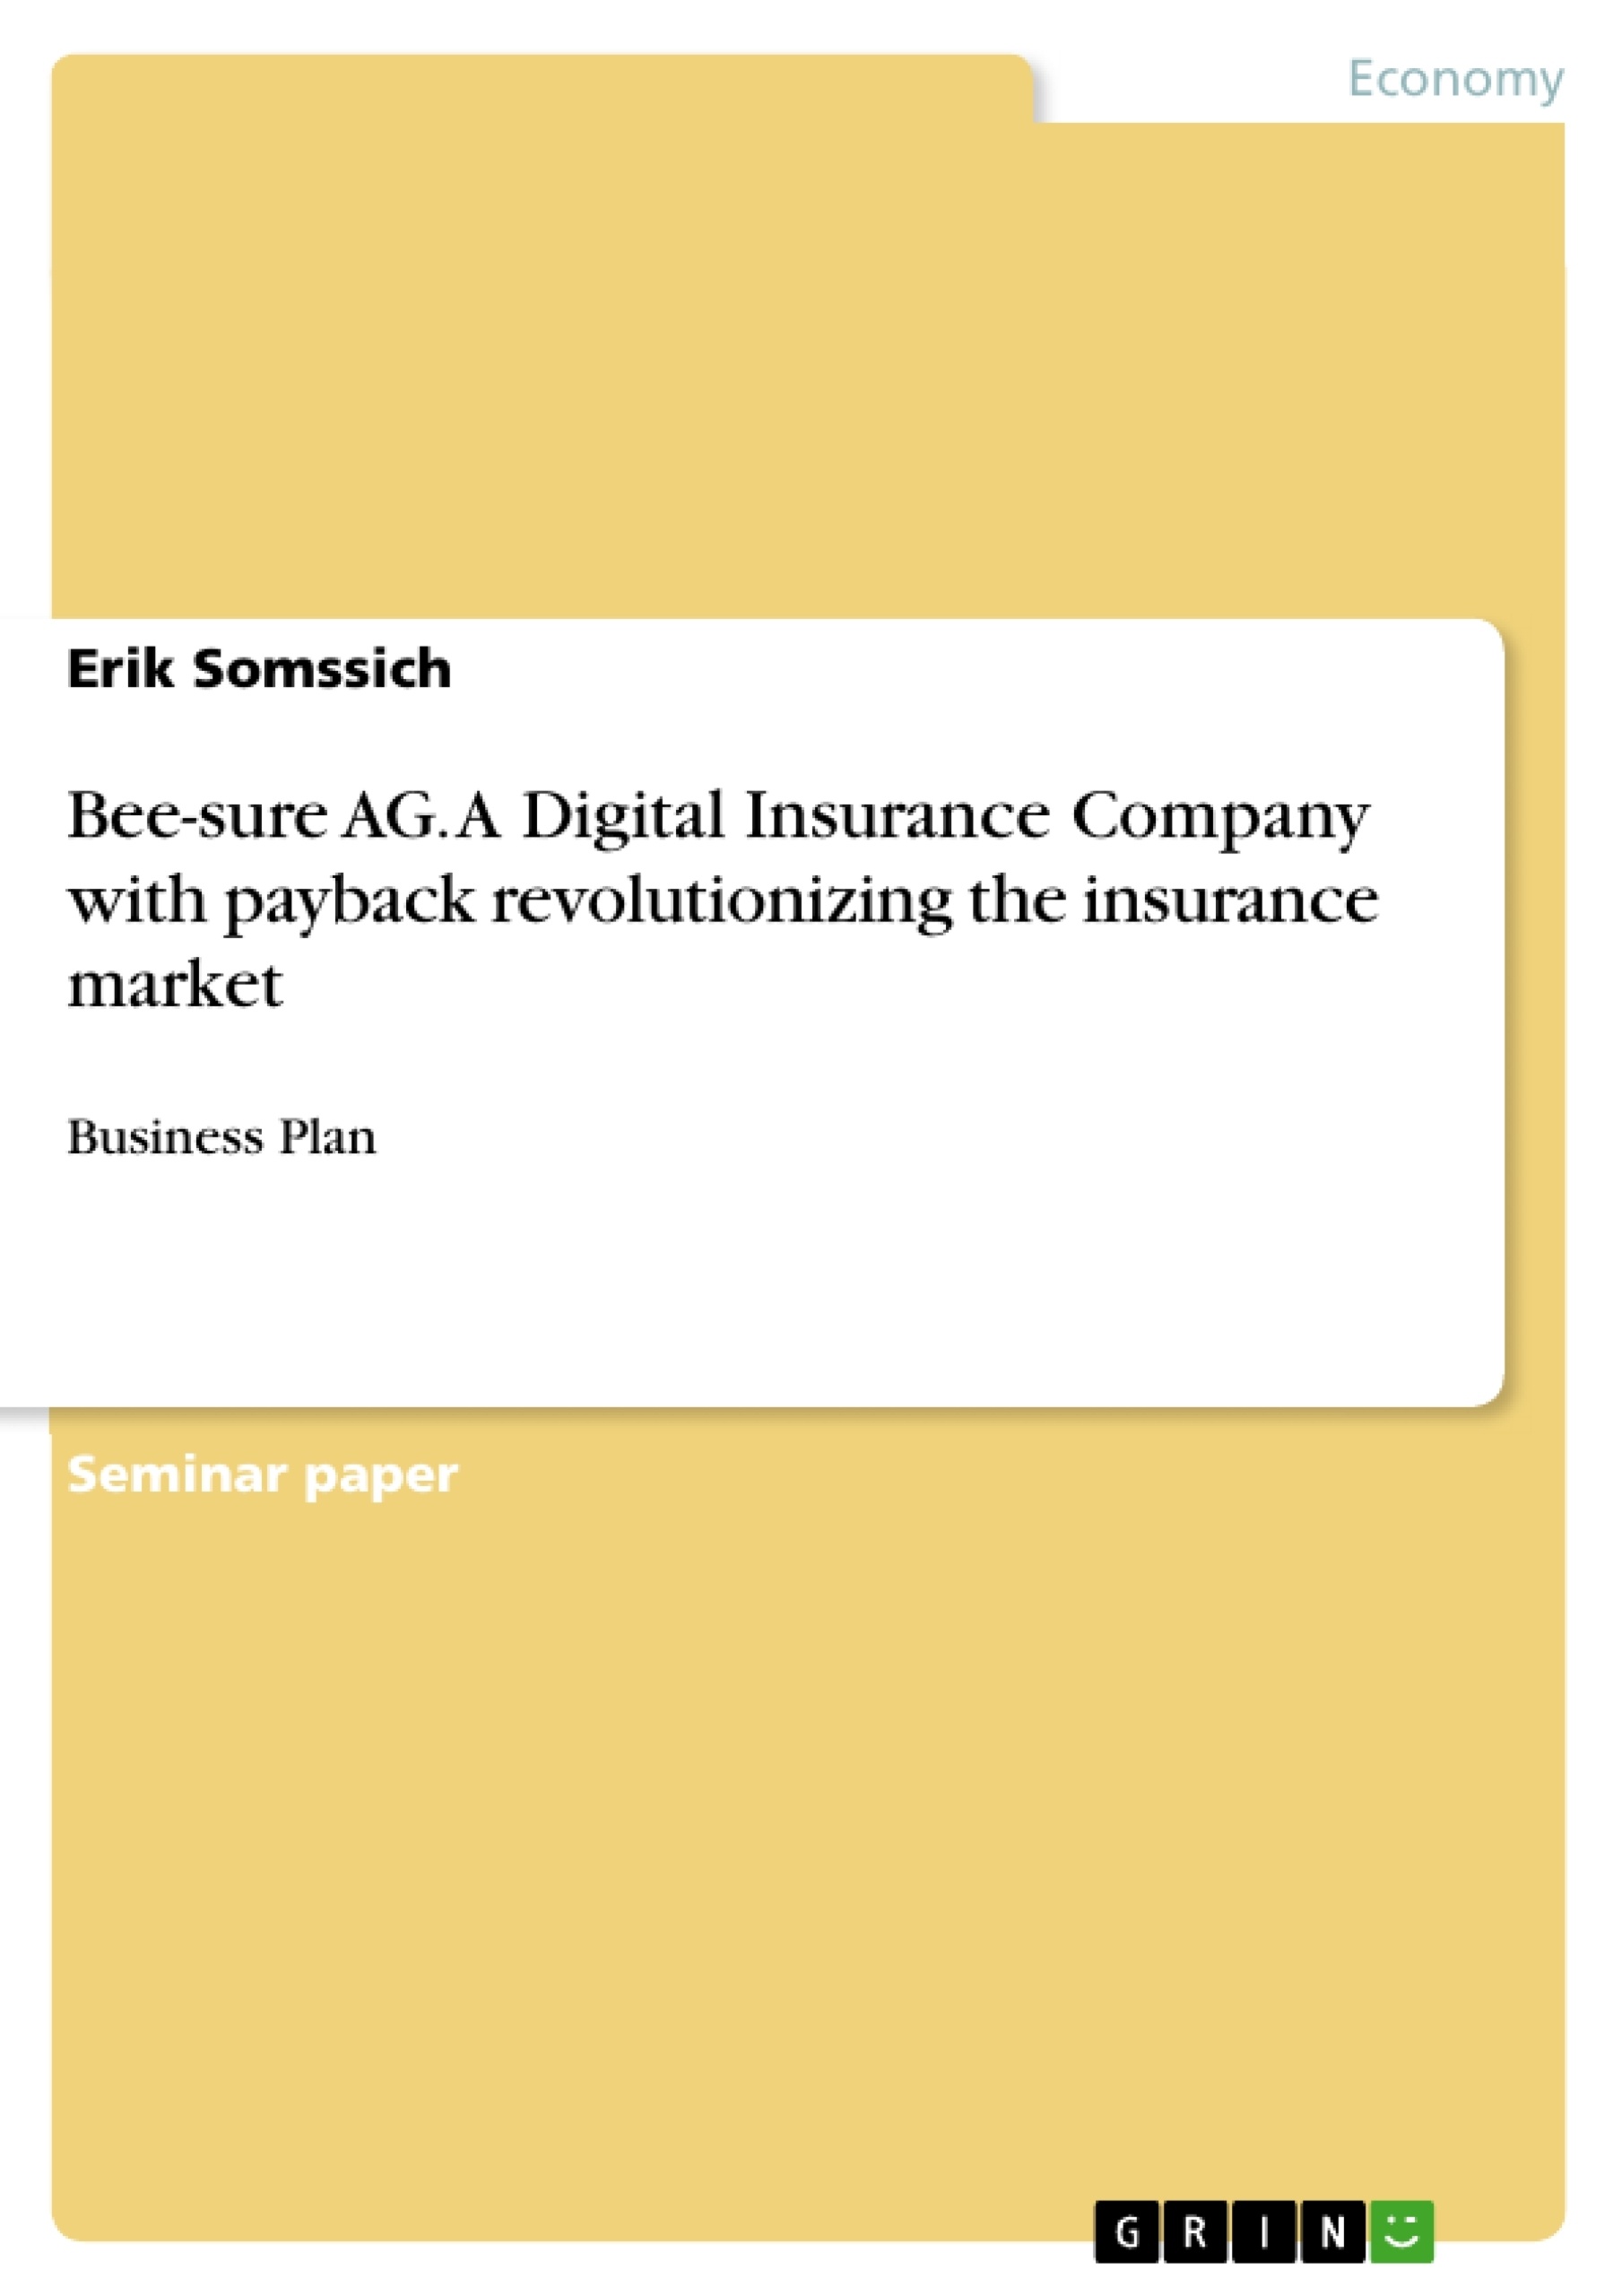 Título: Bee-sure AG. A Digital Insurance Company with payback revolutionizing the insurance market